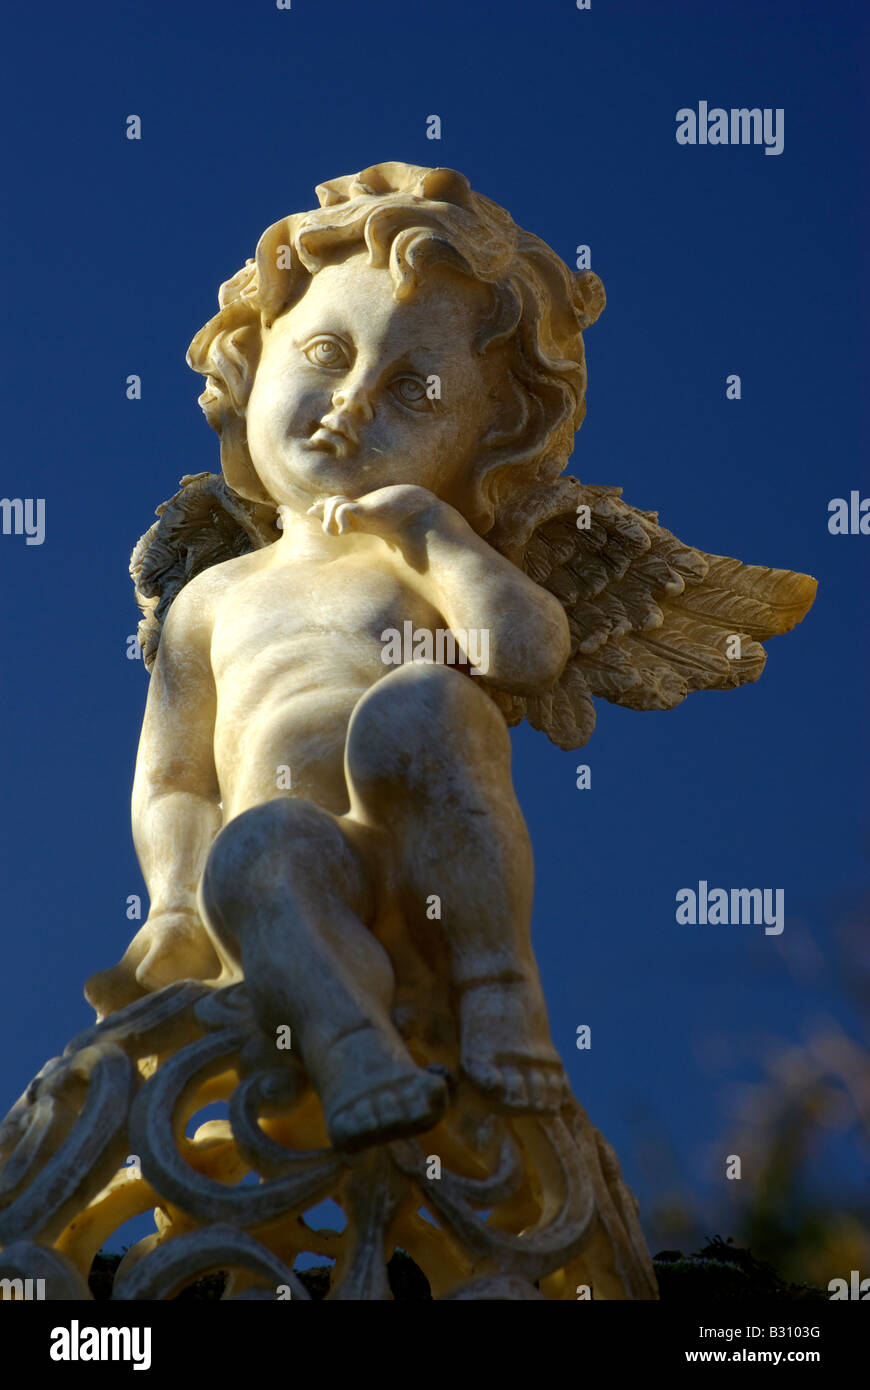 sculpture of an innocent baby angel putto on a grave against a blue sky Stock Photo